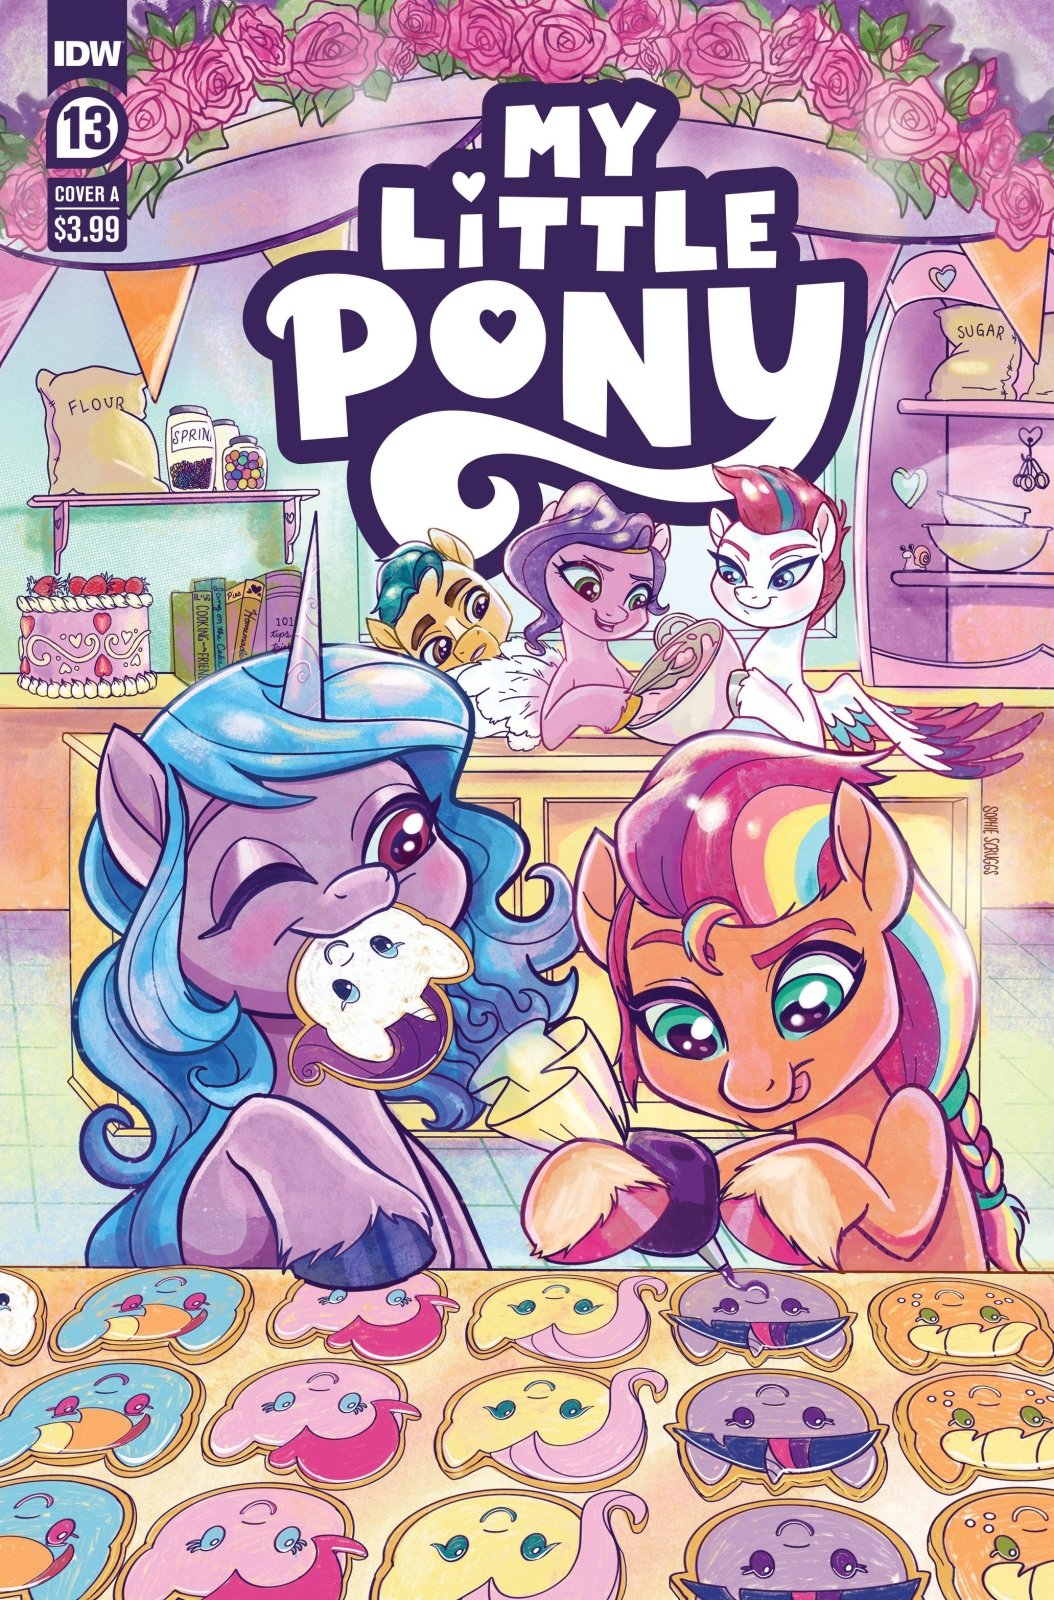 My Little Pony #13 Cover A (Scruggs) - The Fourth Place